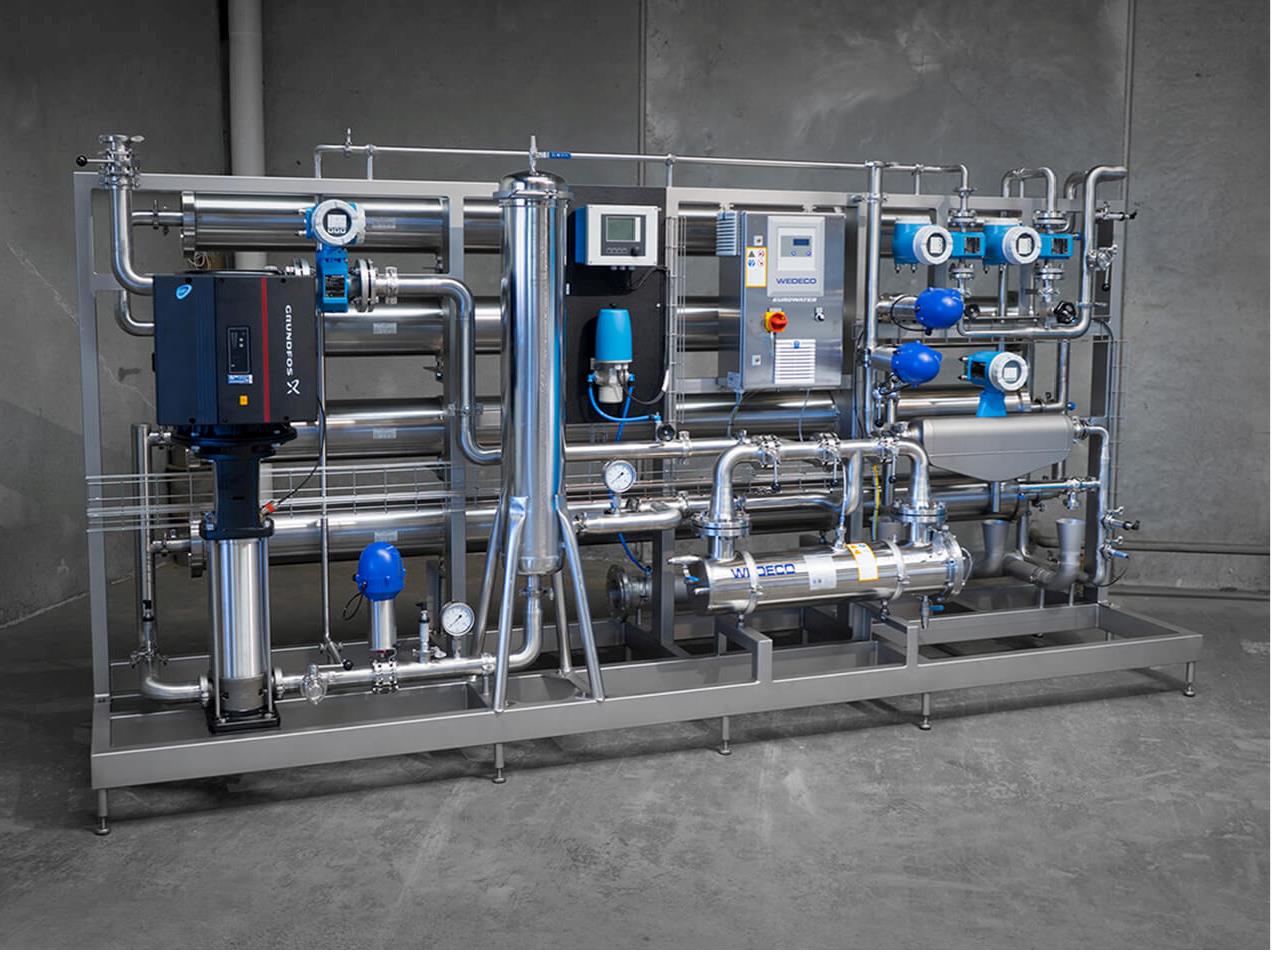 Reverse osmosis in stainless steel for a hygienic design